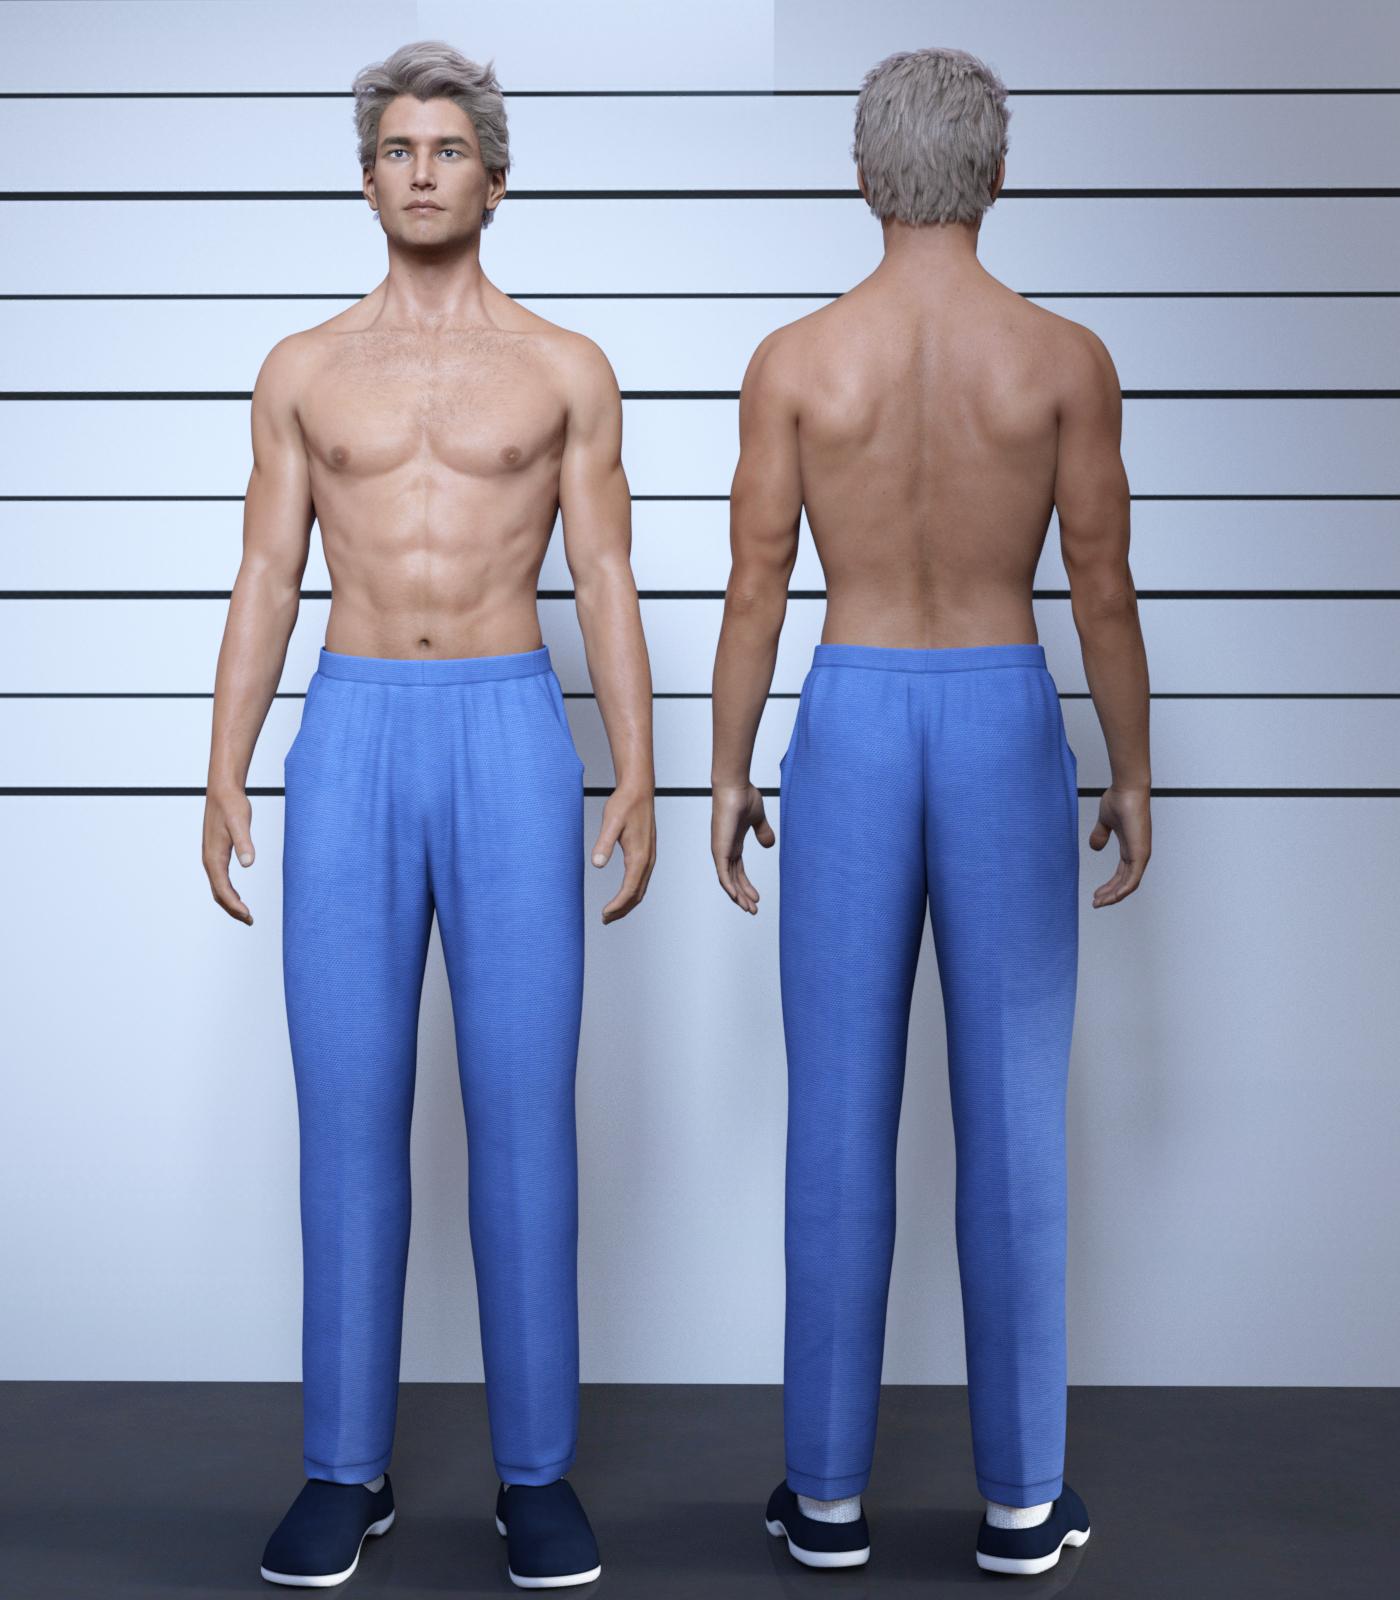 Ideas for male clothing - Daz 3D Forums